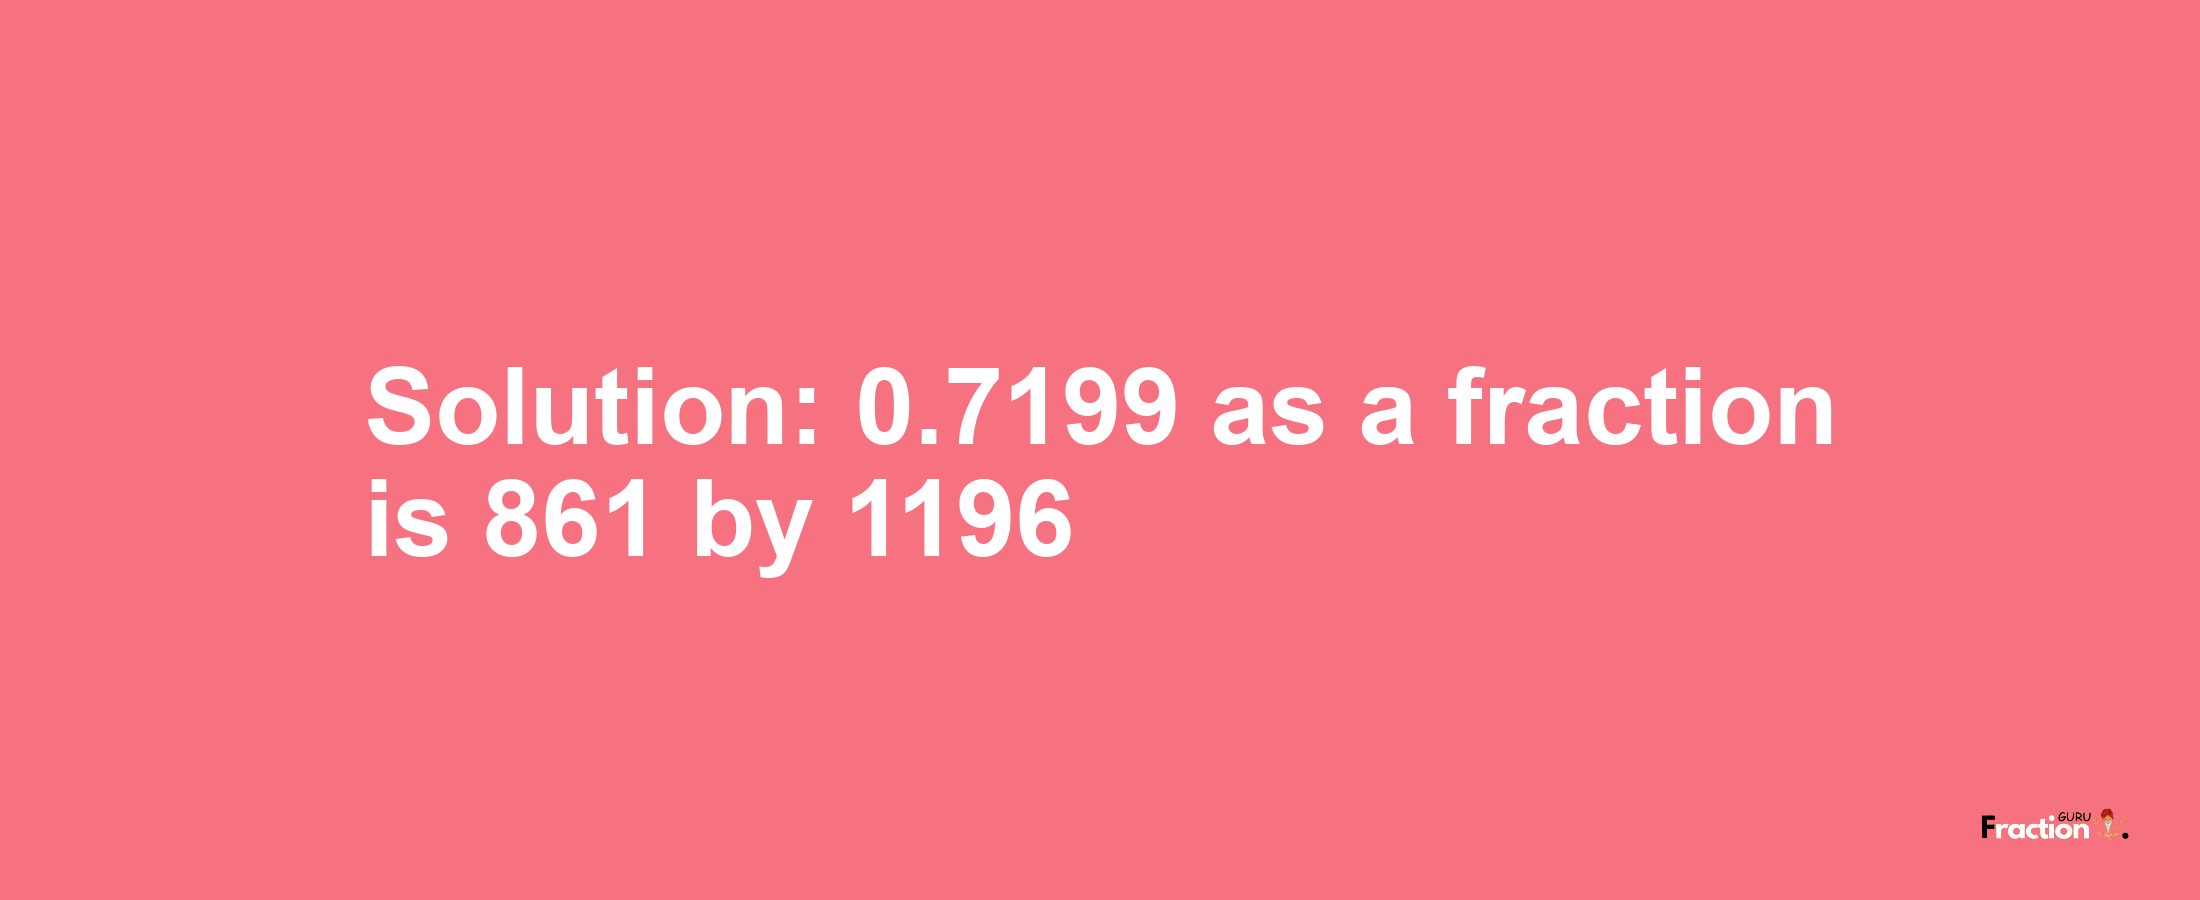 Solution:0.7199 as a fraction is 861/1196